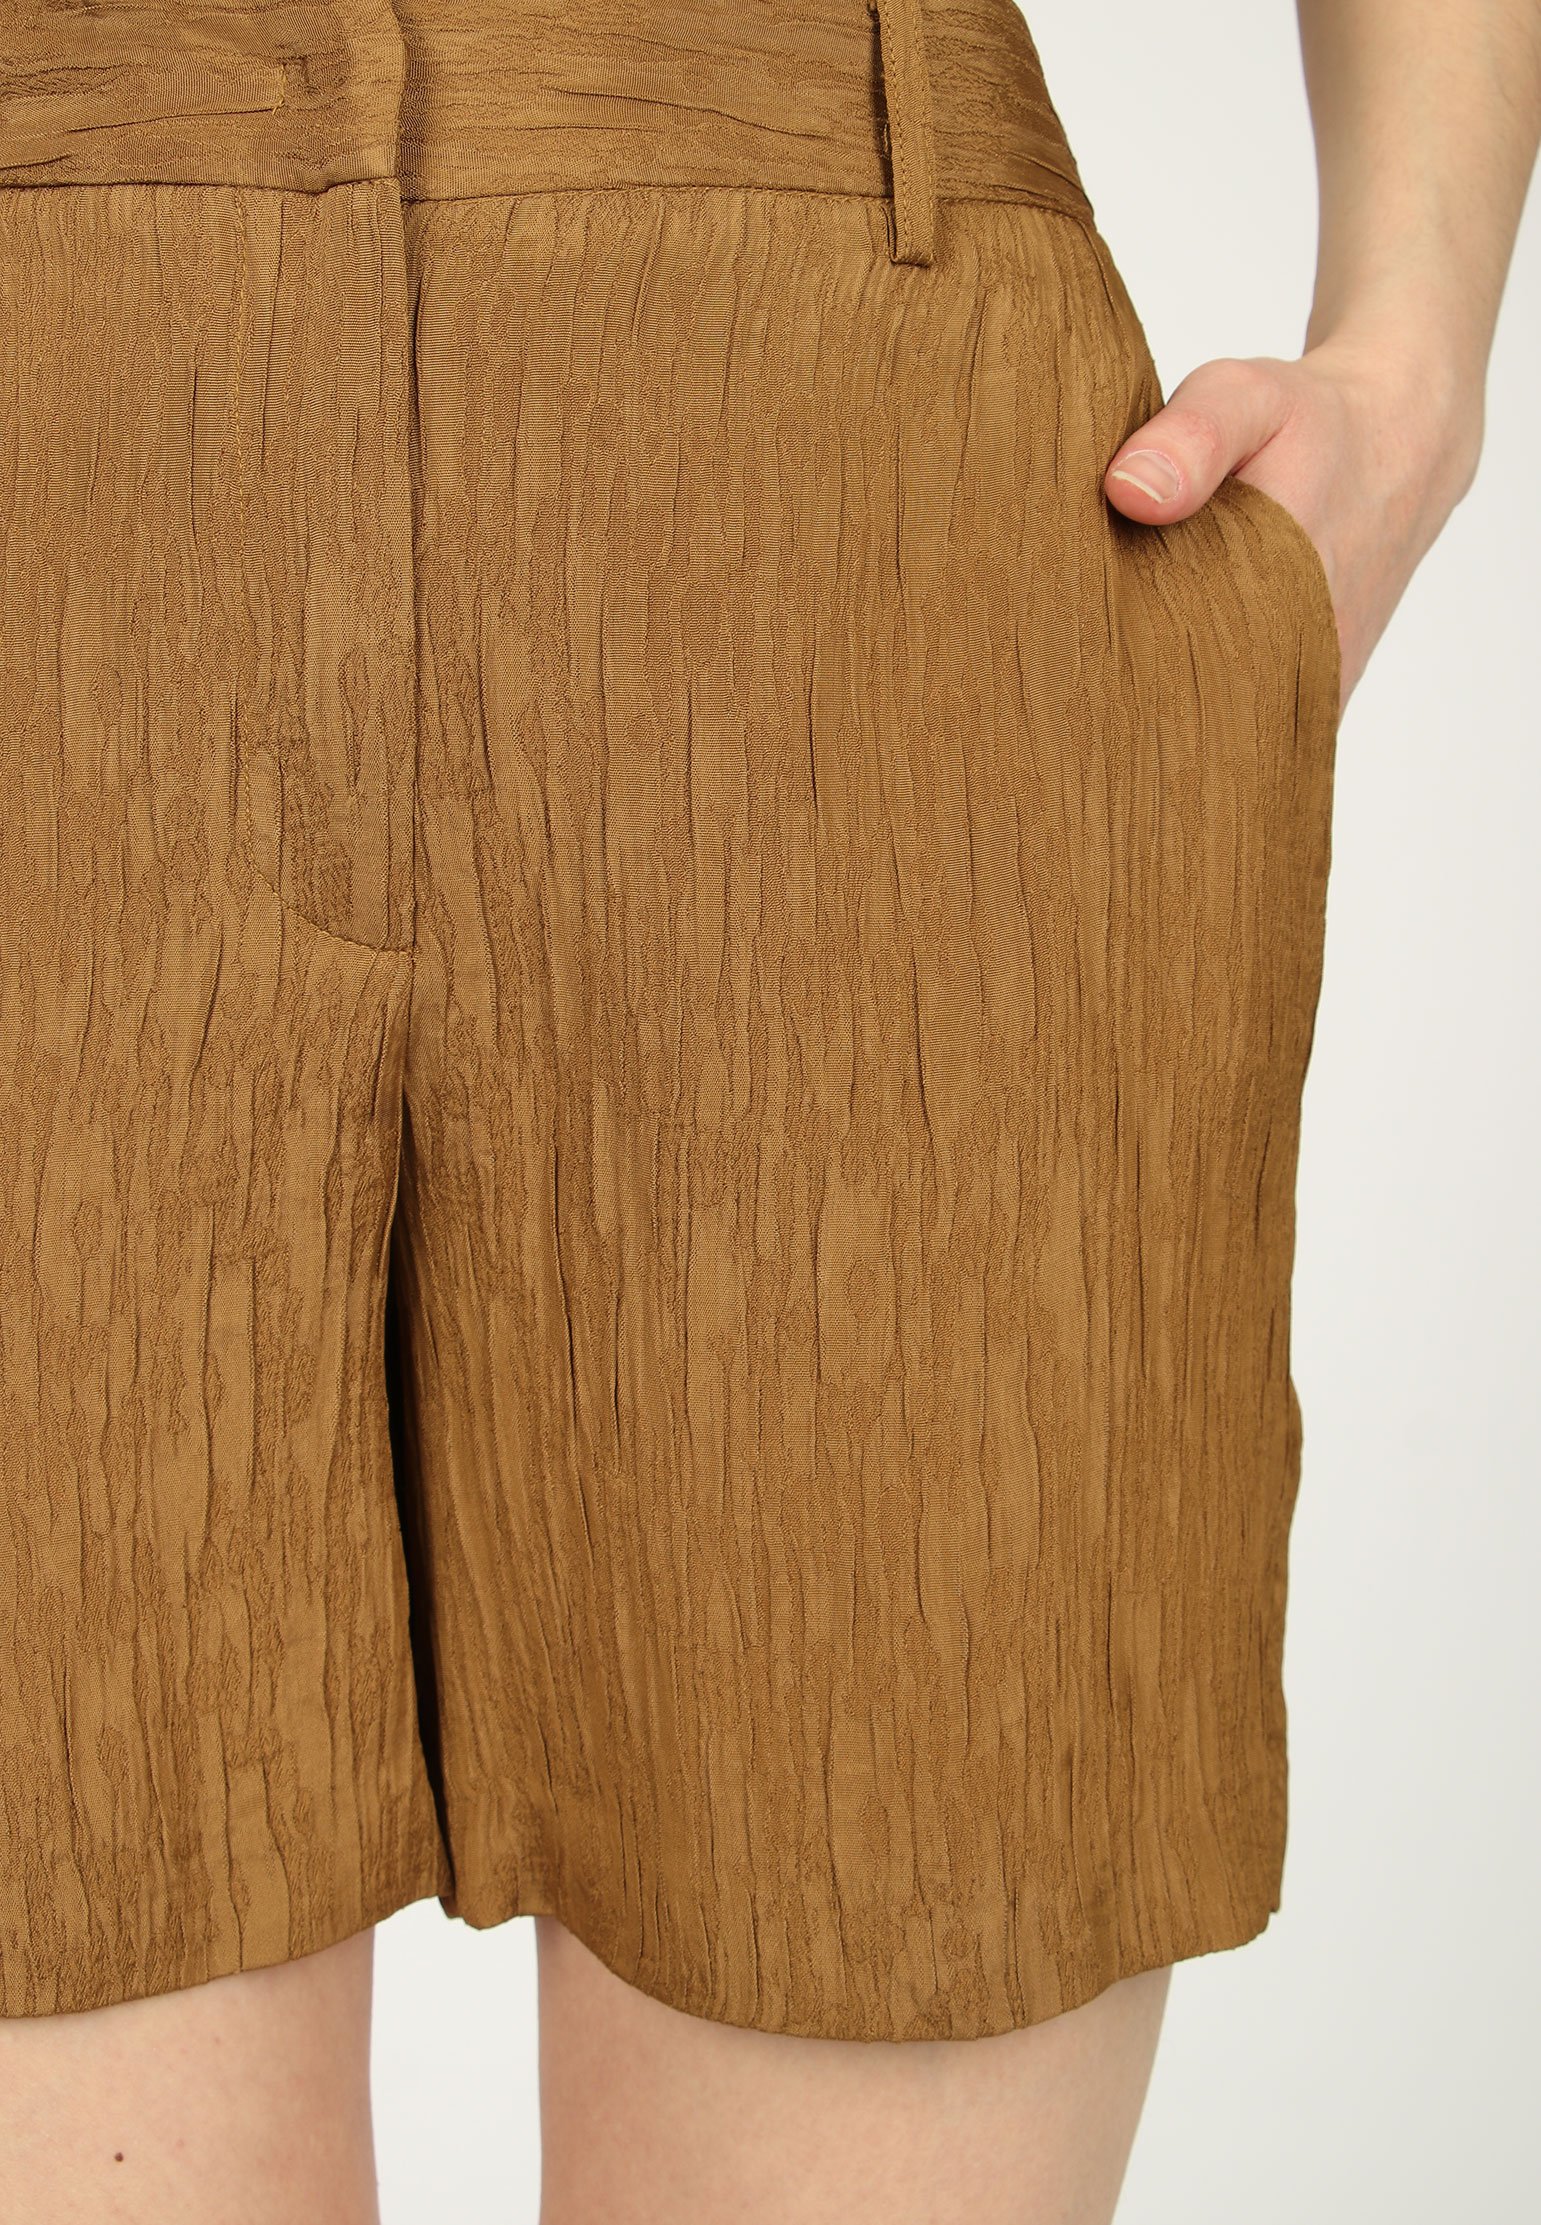 Shorts HANAMI D'OR Color: brown (Code: 3092) in online store Allure